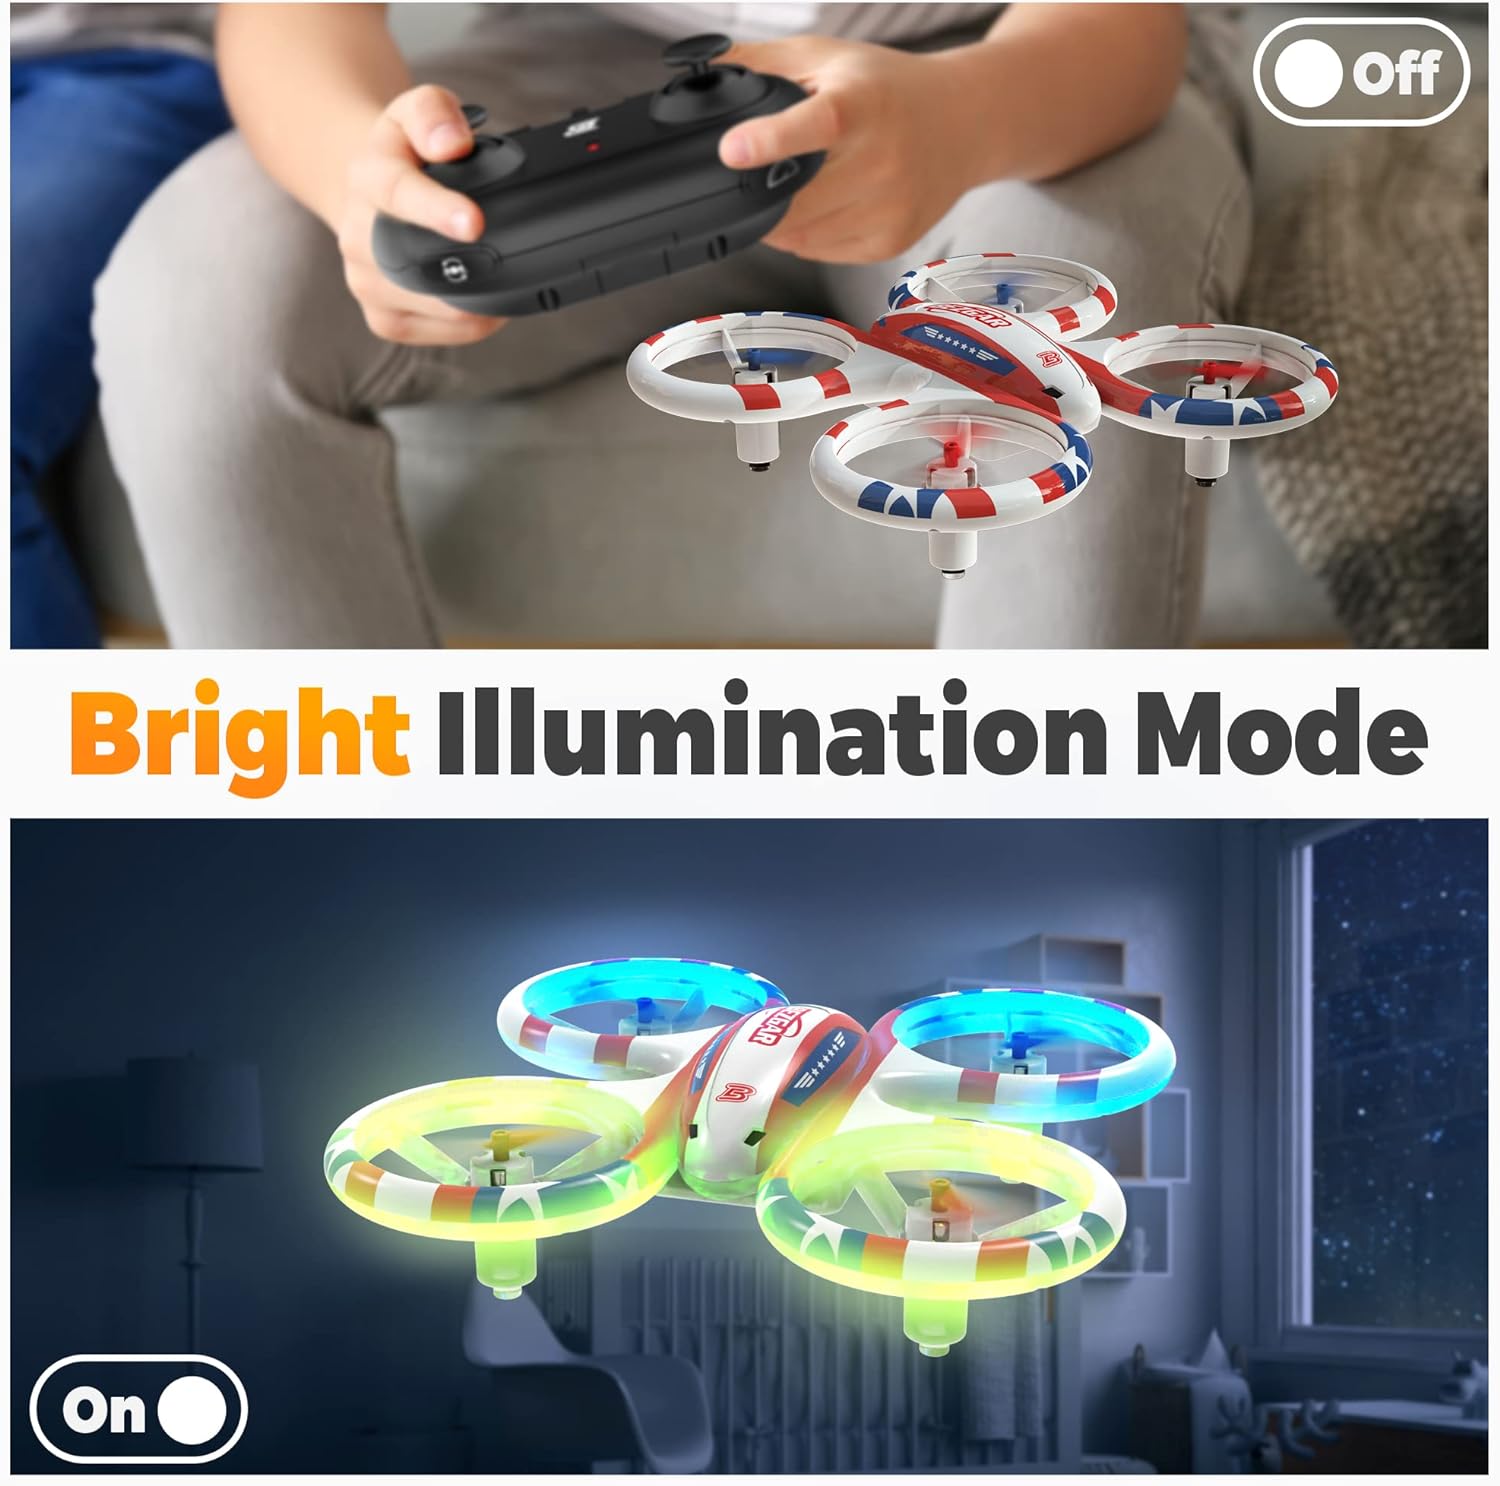 BEZGAR HQ051 Drones for Kids - RC Drone Indoor, LED Remote Control Mini Drone with 3D Flip and 3 Speed Propeller Full Protect Small Drone Quadcopter for Beginners, Easy to fly Gifts for Kids